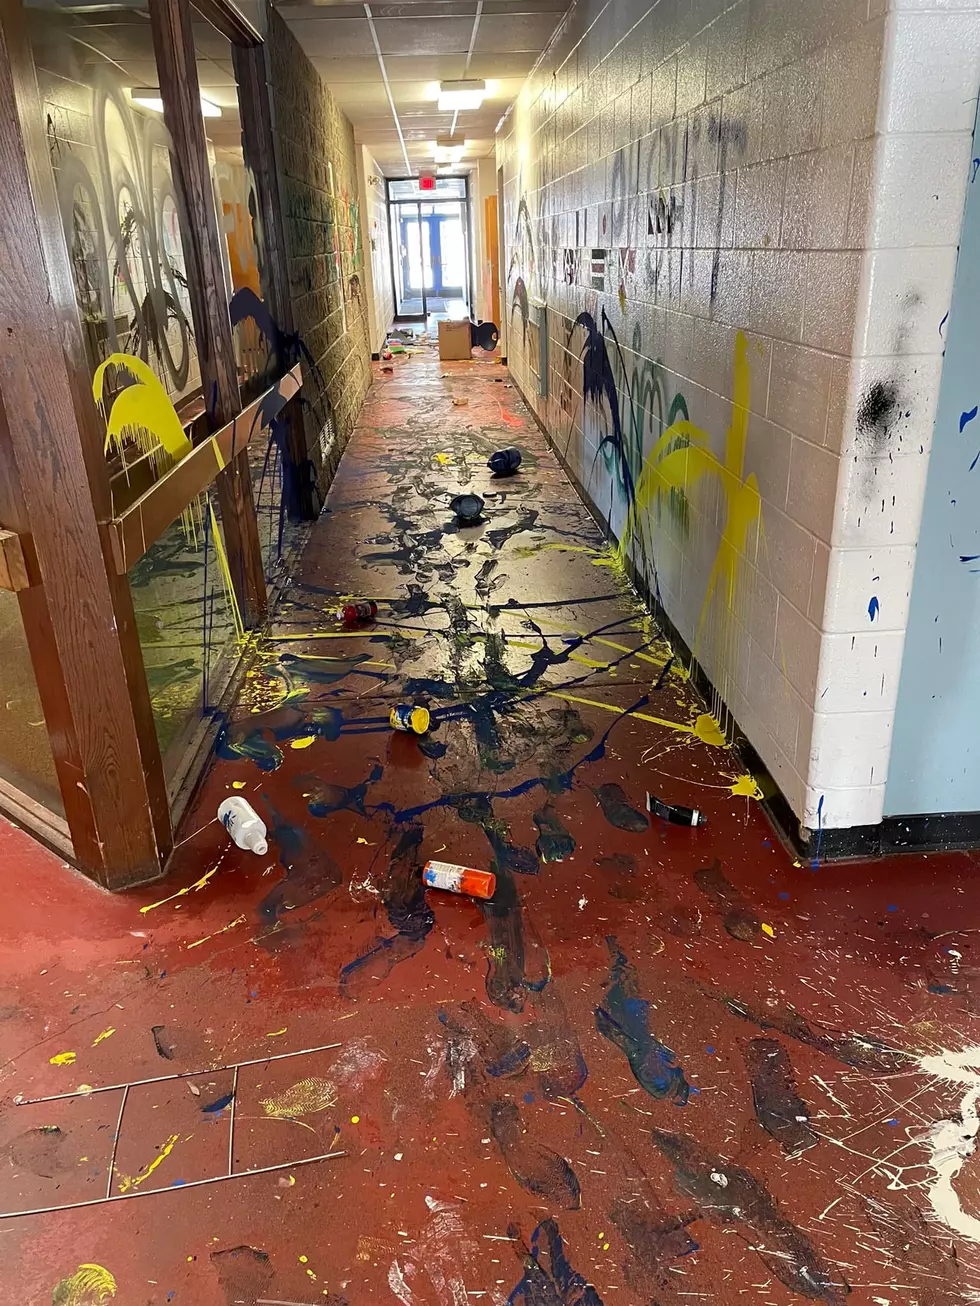 Photos of Vandalism At a Lewiston School Are Heartbreaking